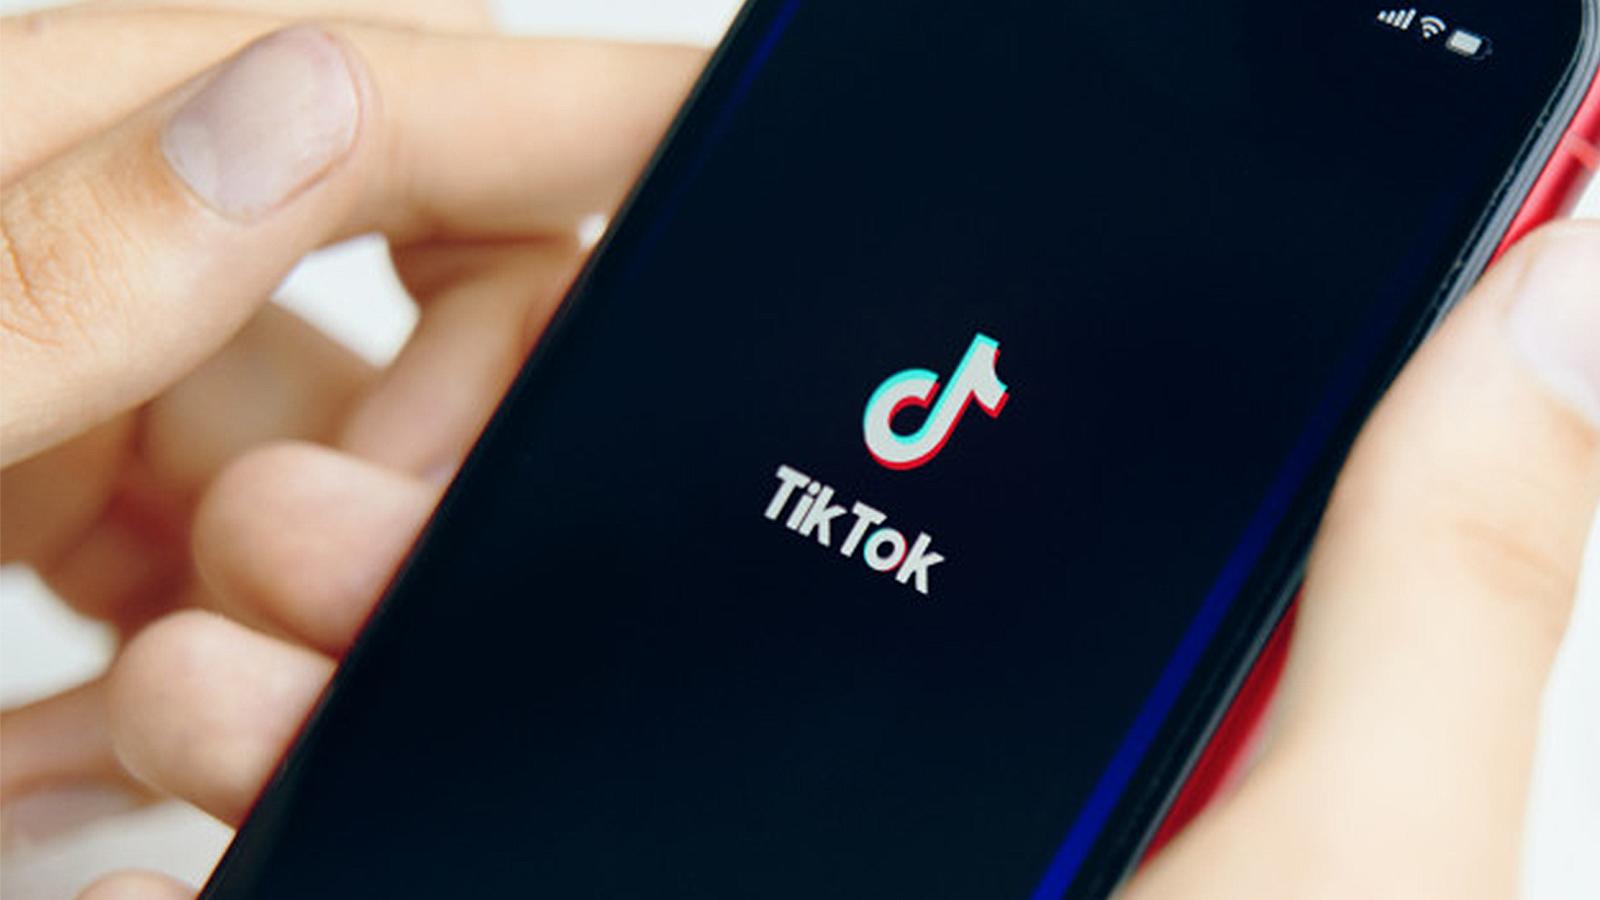 A smartphone with the TikTok logo is held in a person's hand.